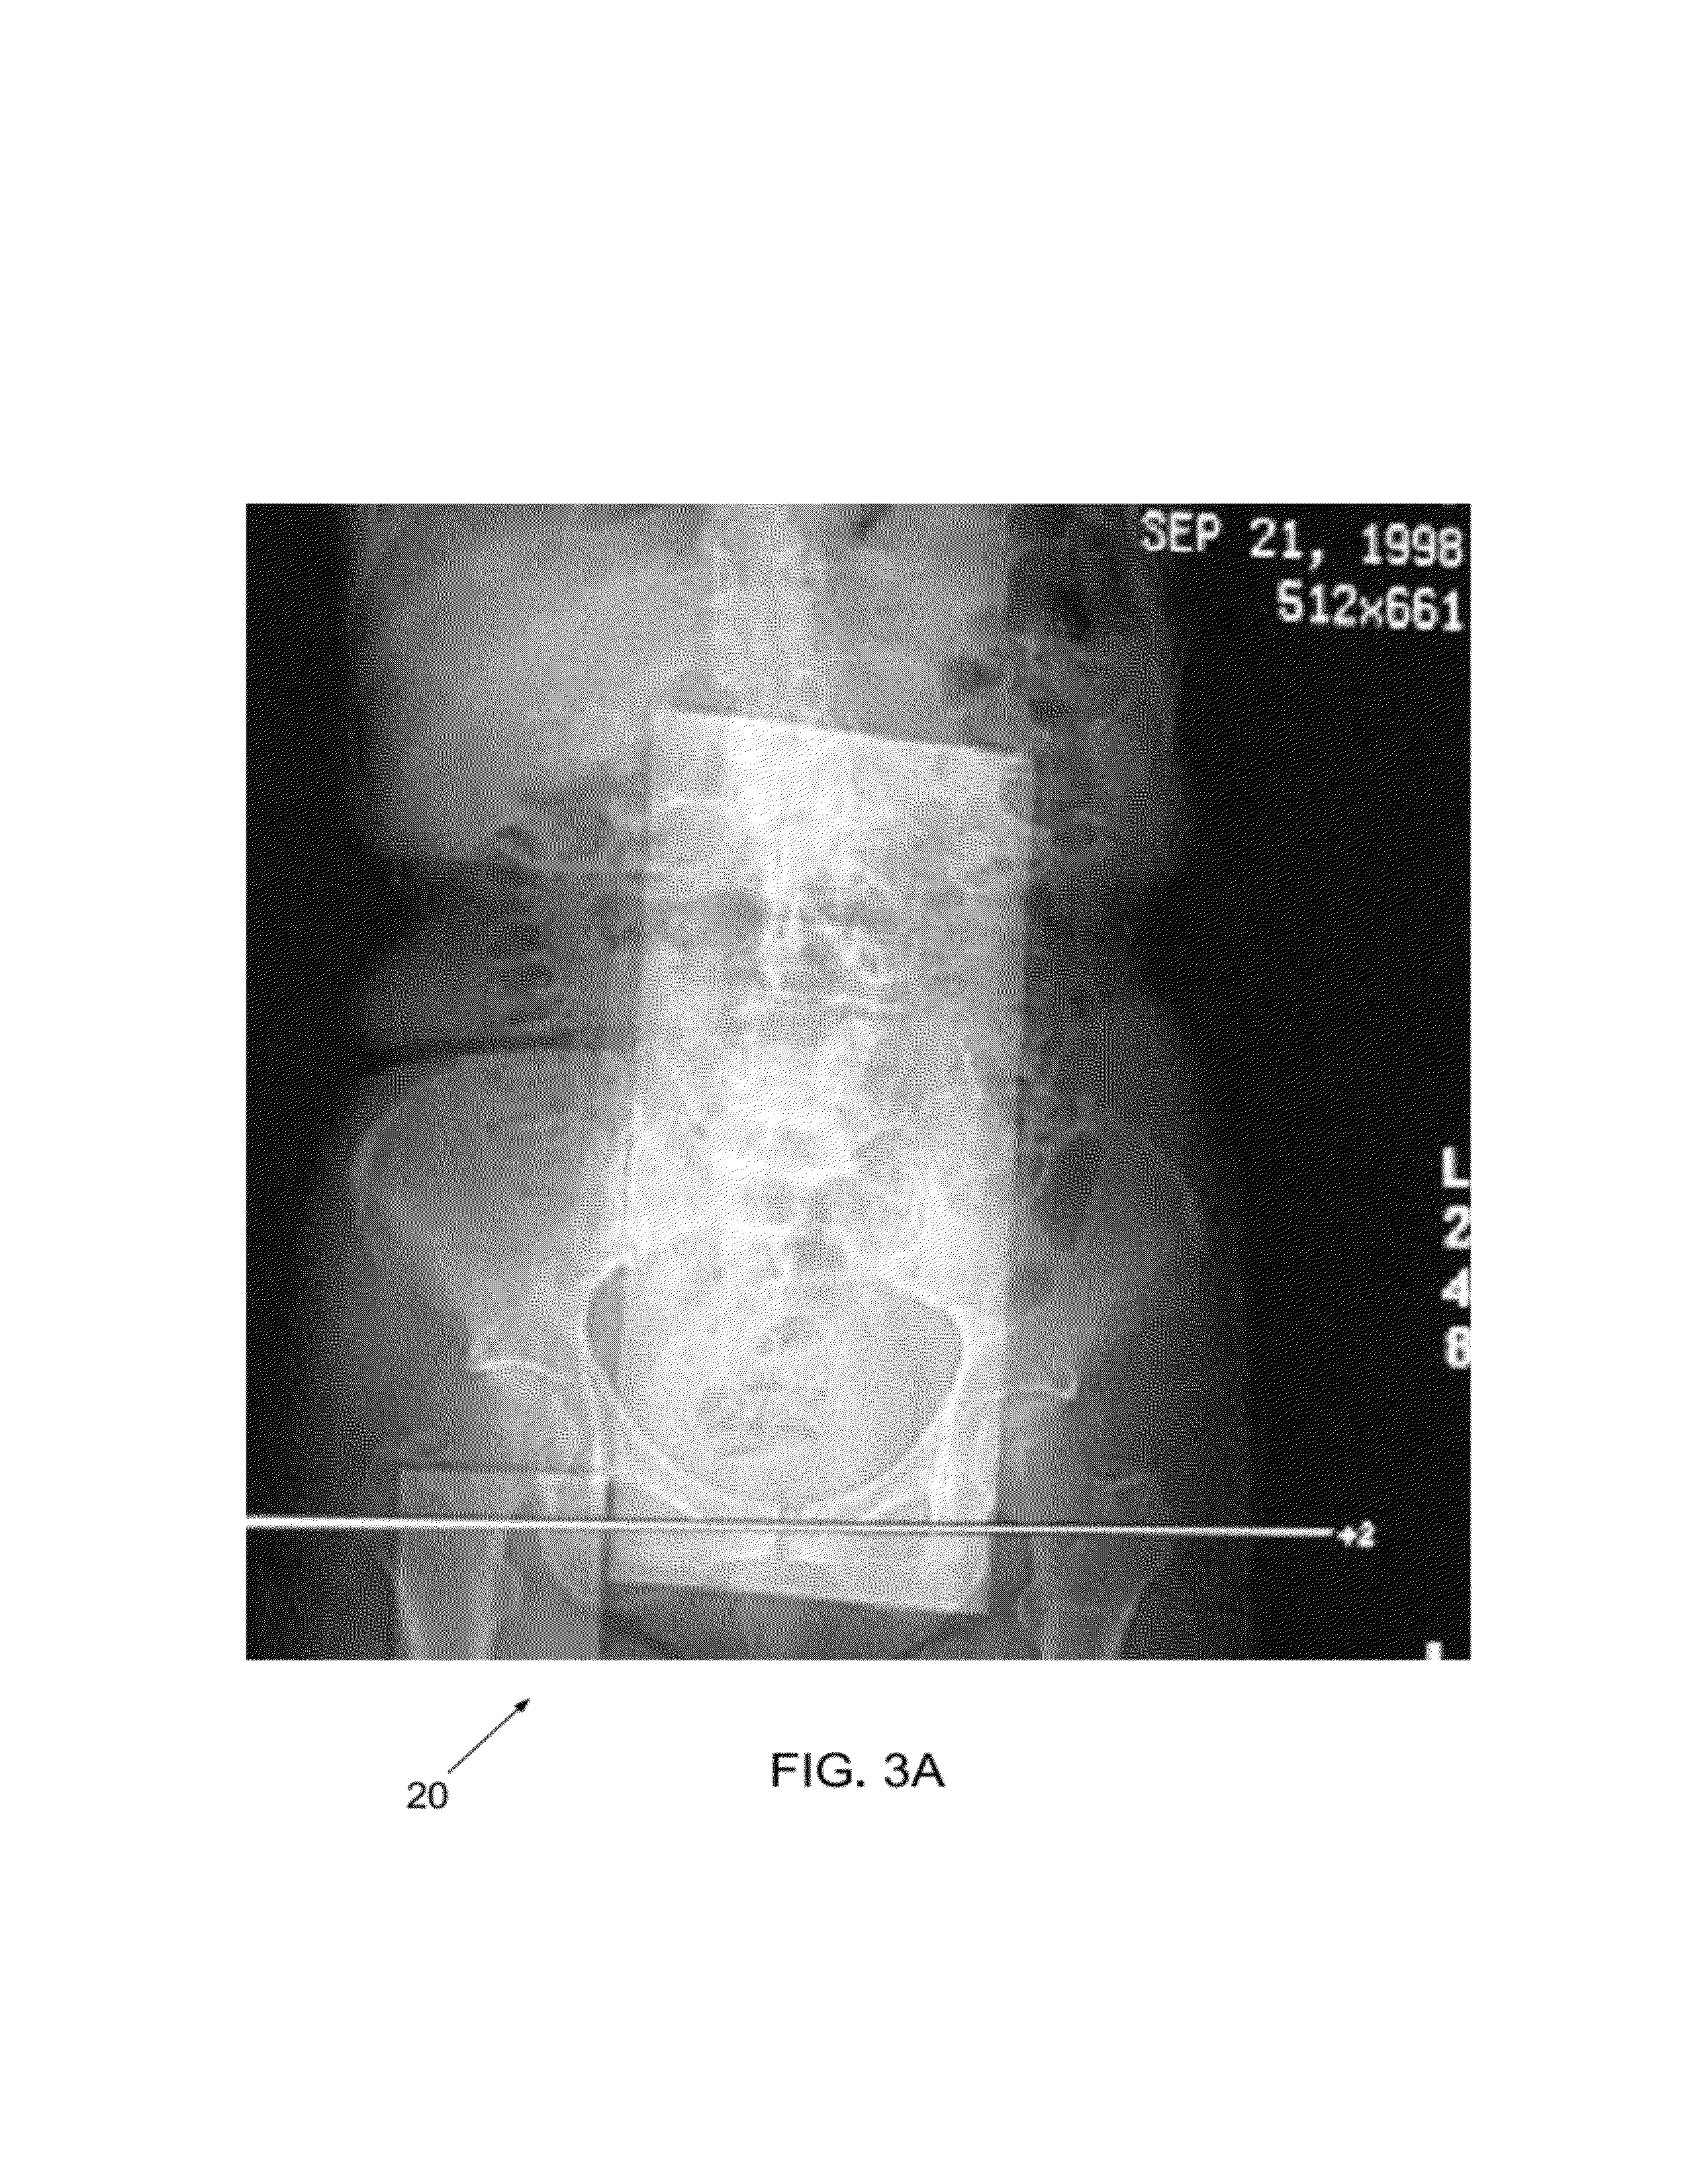 Extended and fixed INTable simultaneously imaged calibration and correction methods and references for 3-D imaging devices